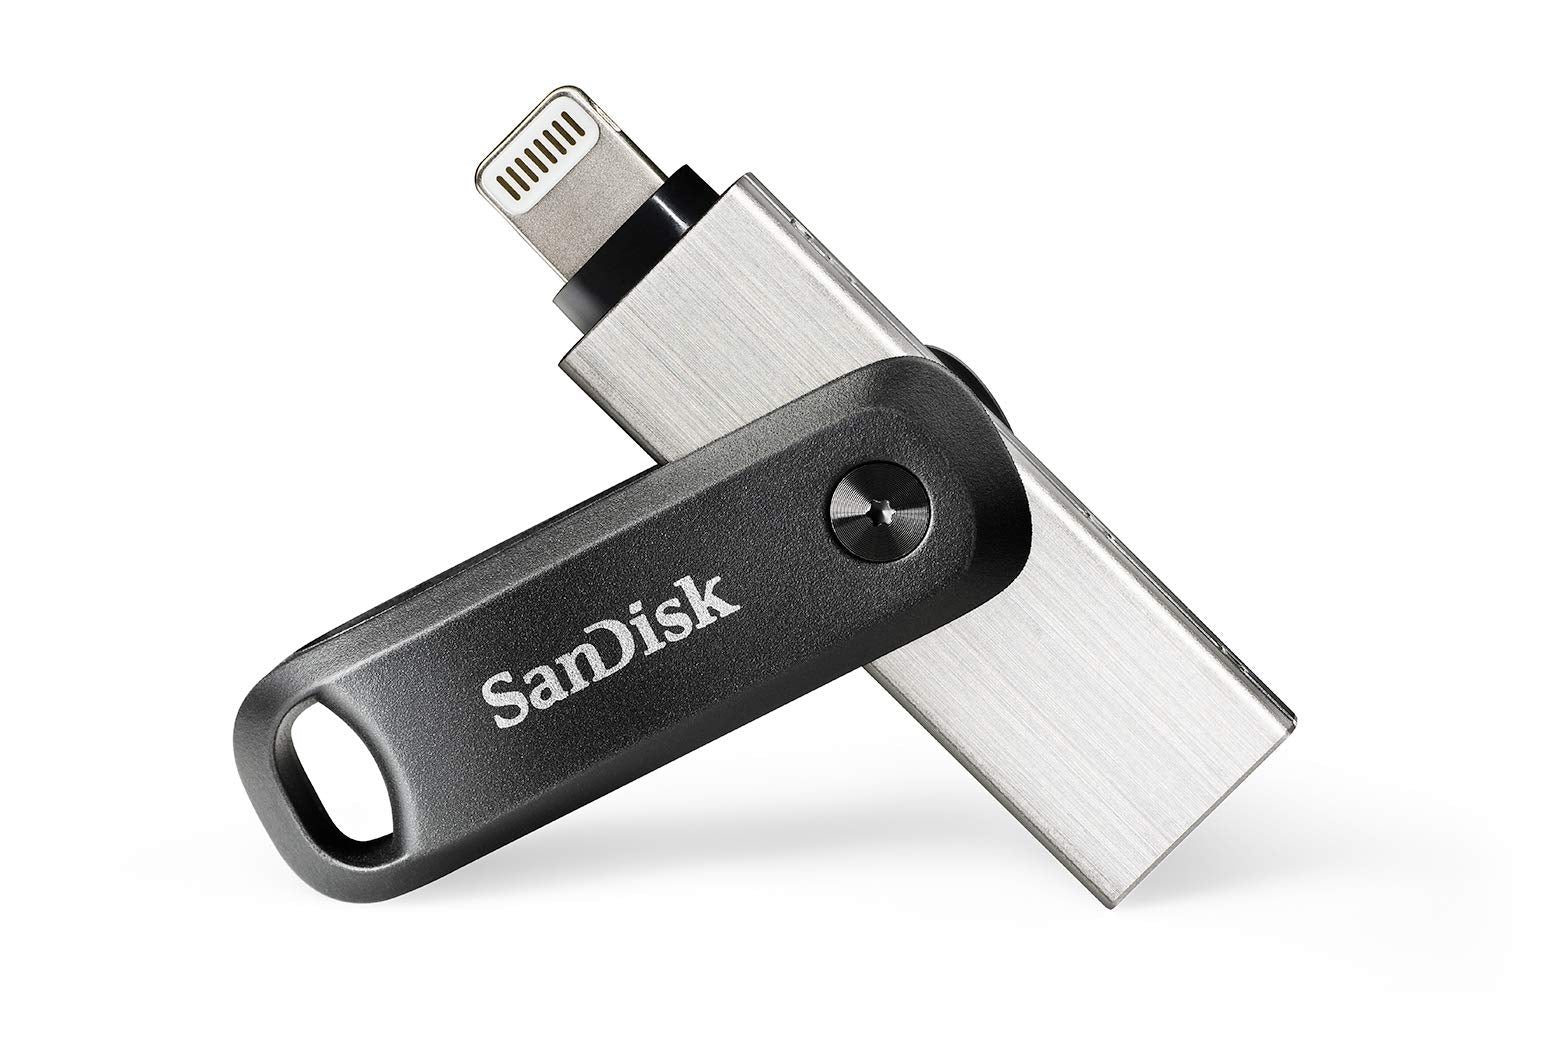 SanDisk 64GB iXpand USB Flash Drive Go for your iPhone and iPad